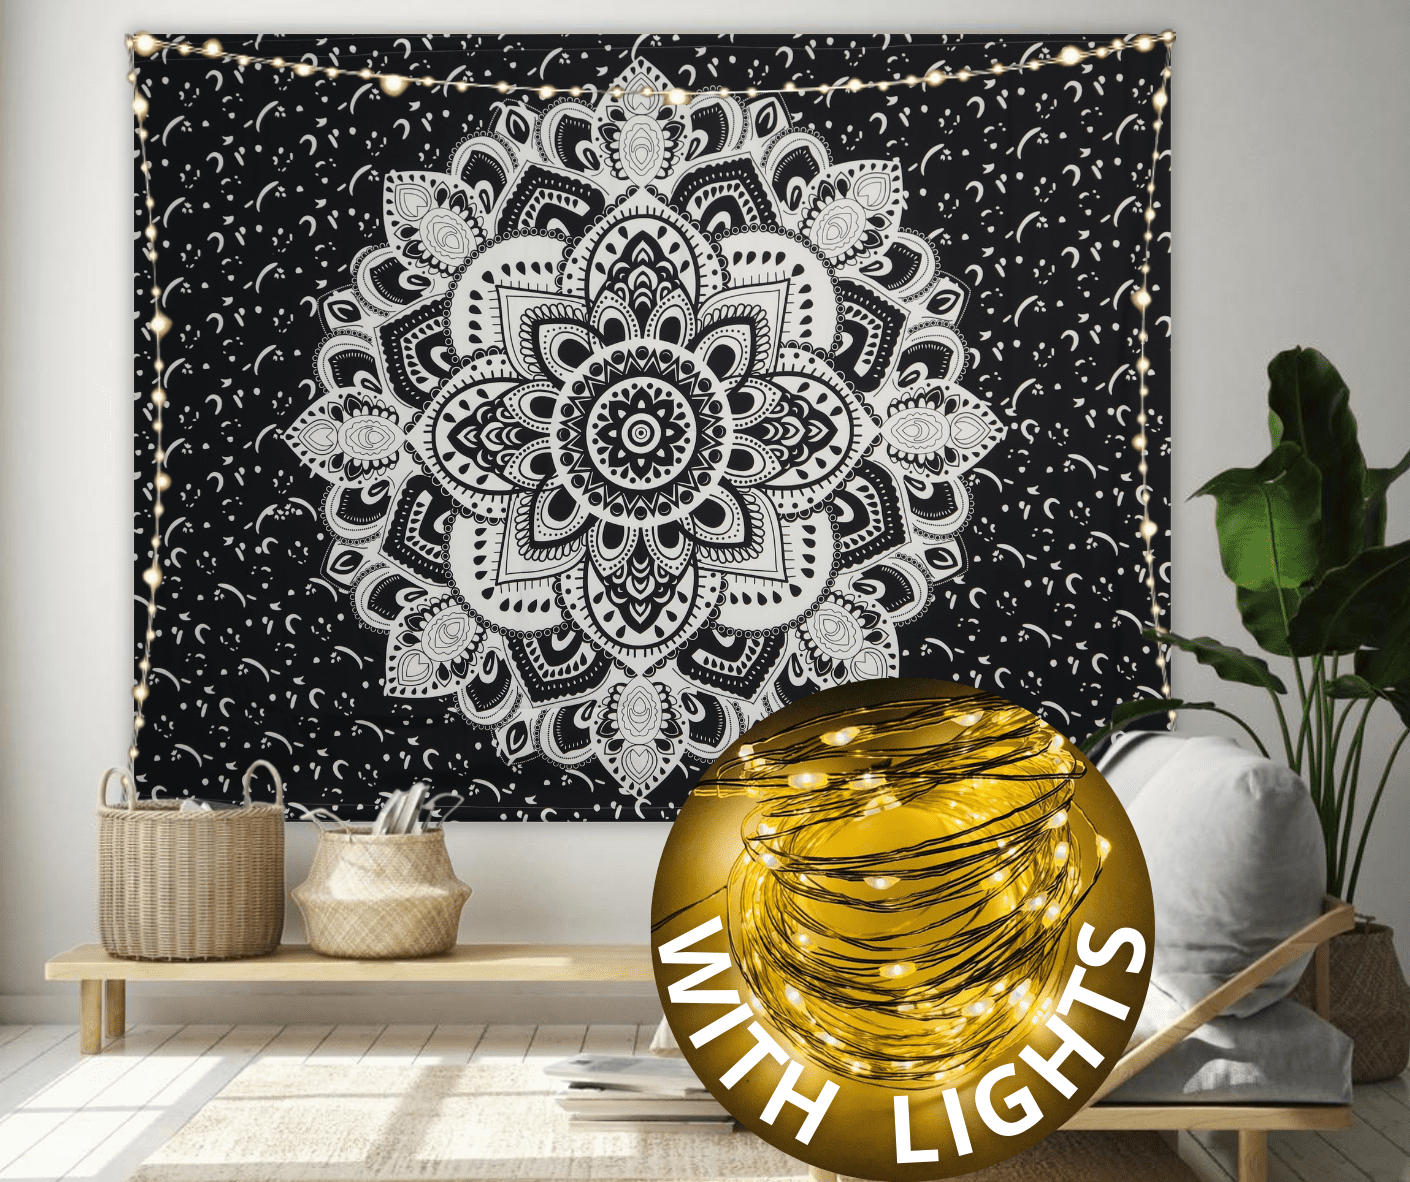 Large Tapestry Wall Hanging Home Decor Hippie Mandala Psychedelic Flower Poster